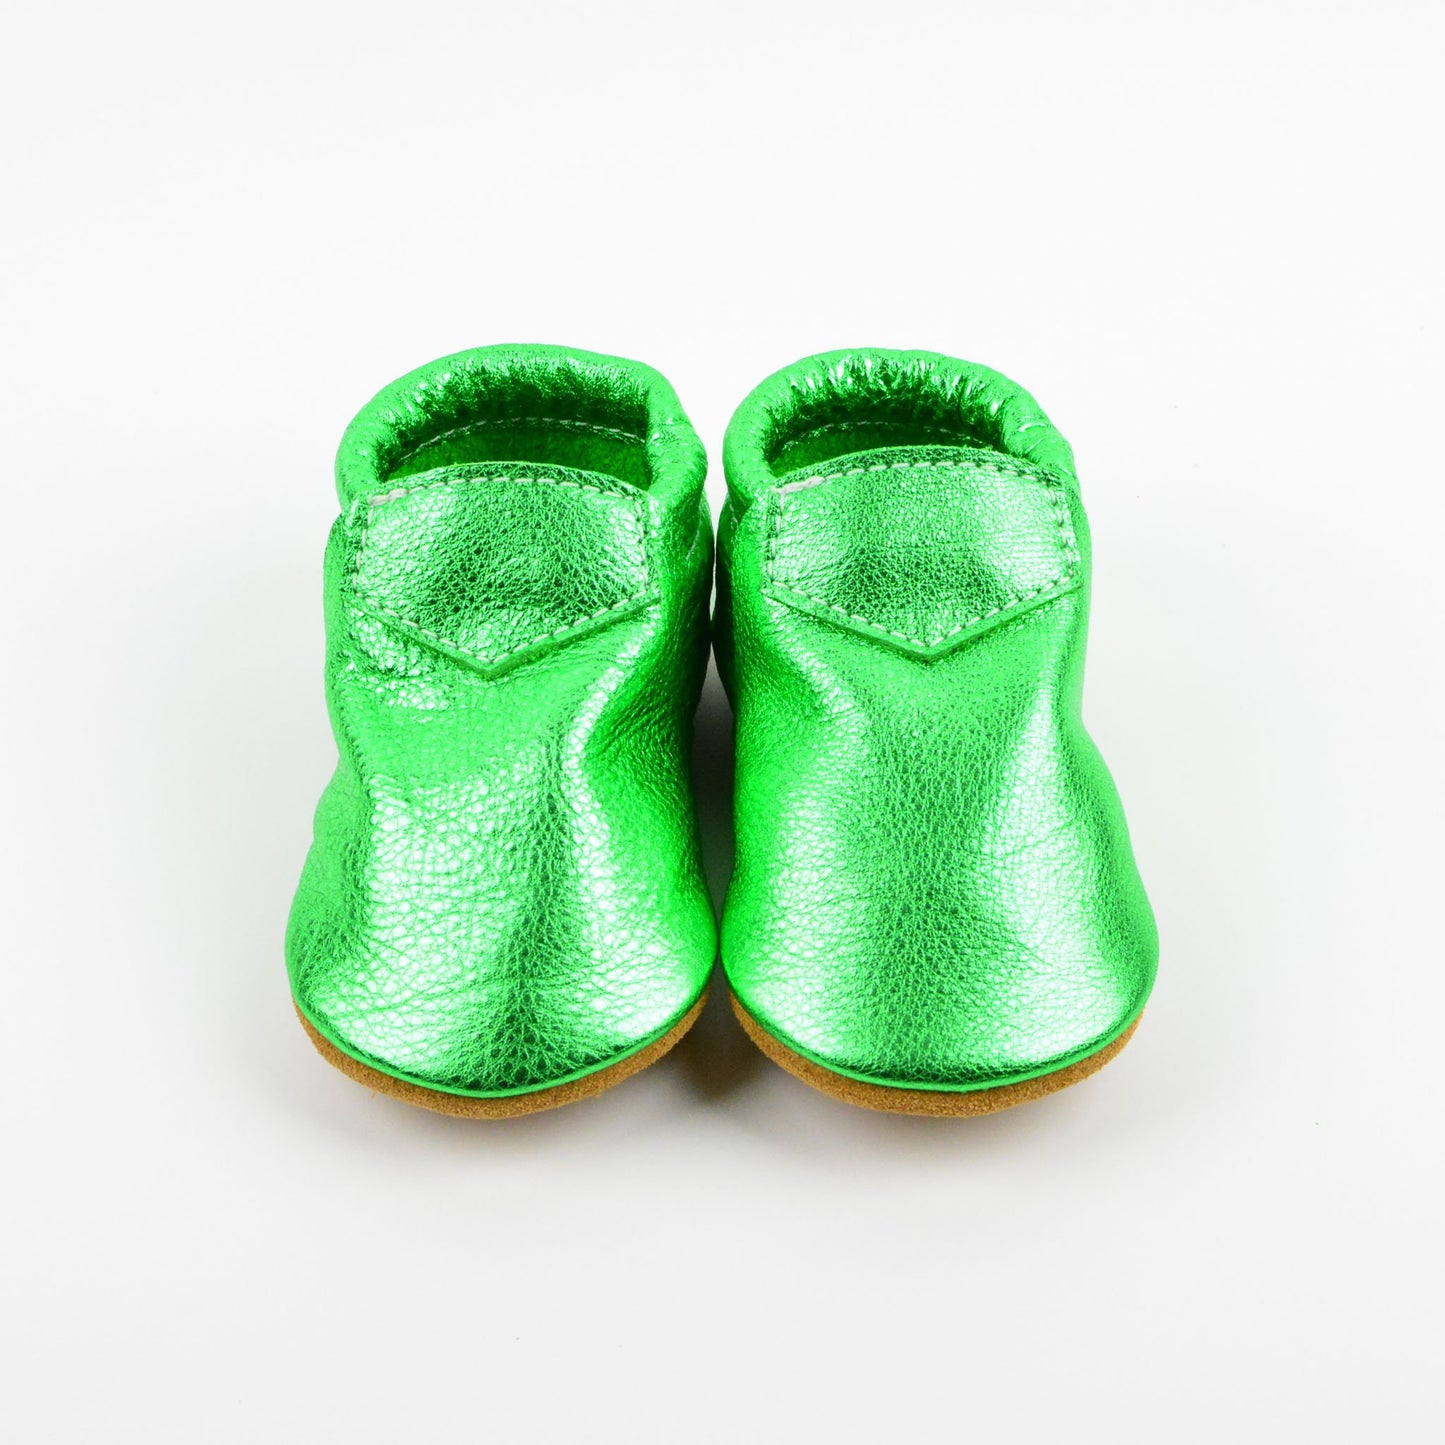 RTS Christmas Green Lokicks With Tan Suede Leather Soles - Size 3 (12-18M)(5")